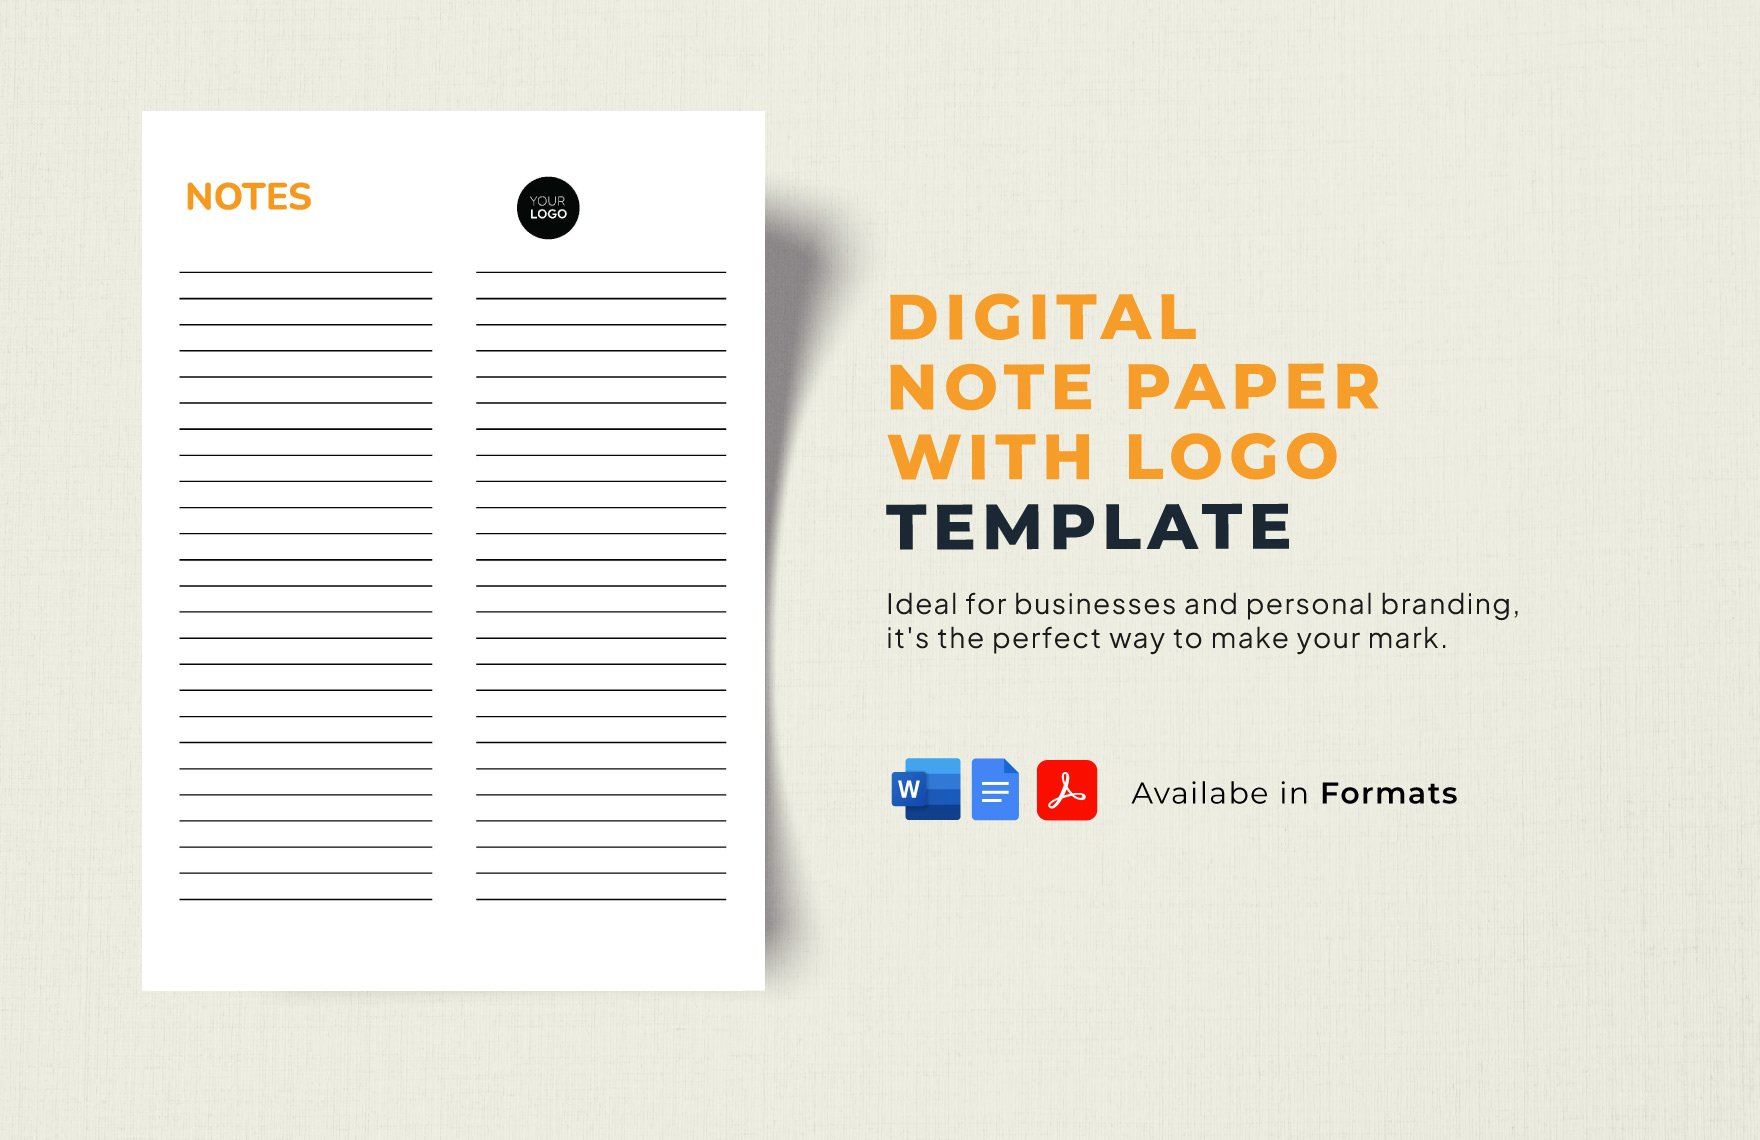 Digital Note Paper with Logo Template